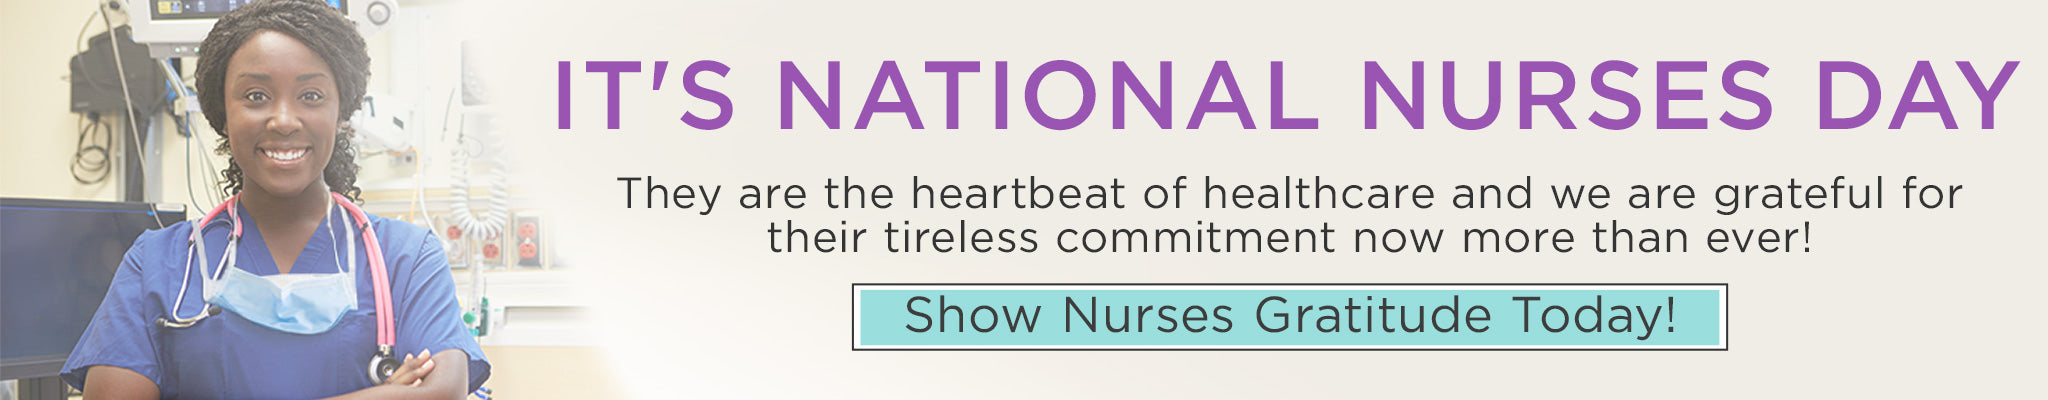 It's National Nurses Day! | They are the heartbeat of healthcare and we are grateful for their tireless commitment now more than ever | Show Nurses Gratitude Today!